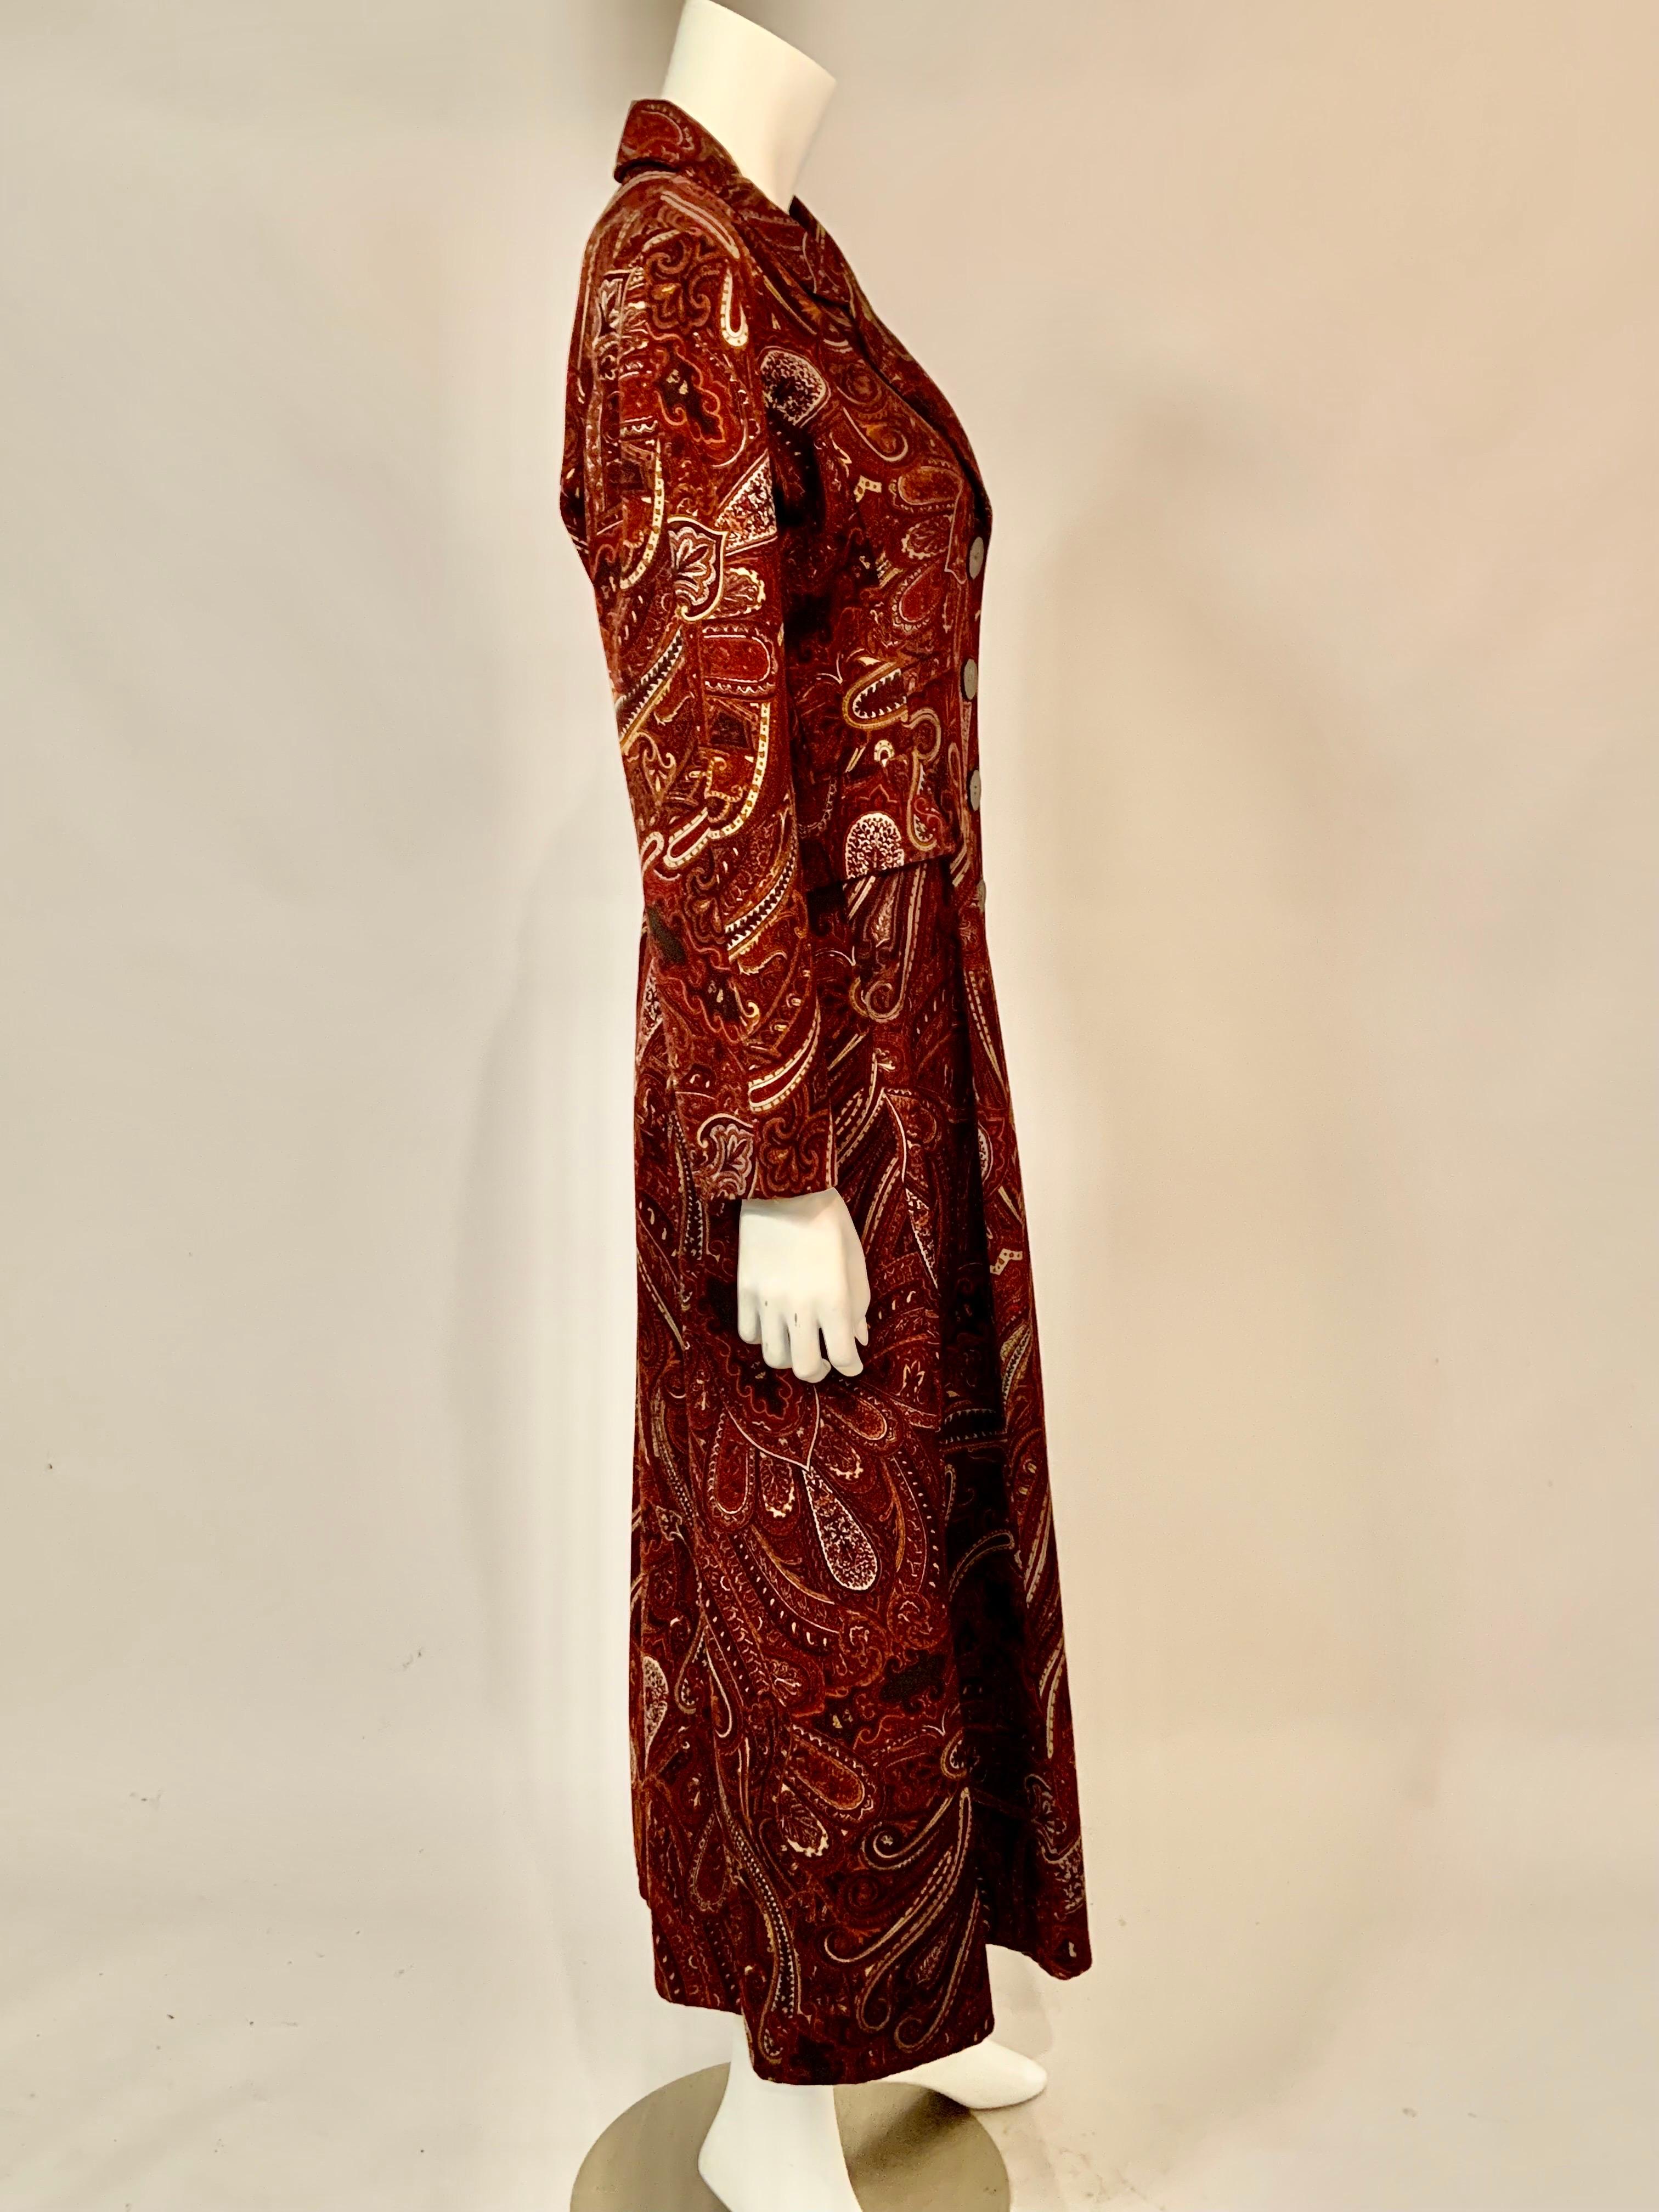 Bill Blass Paisley Patterned Coat in a Larger Size For Sale 1